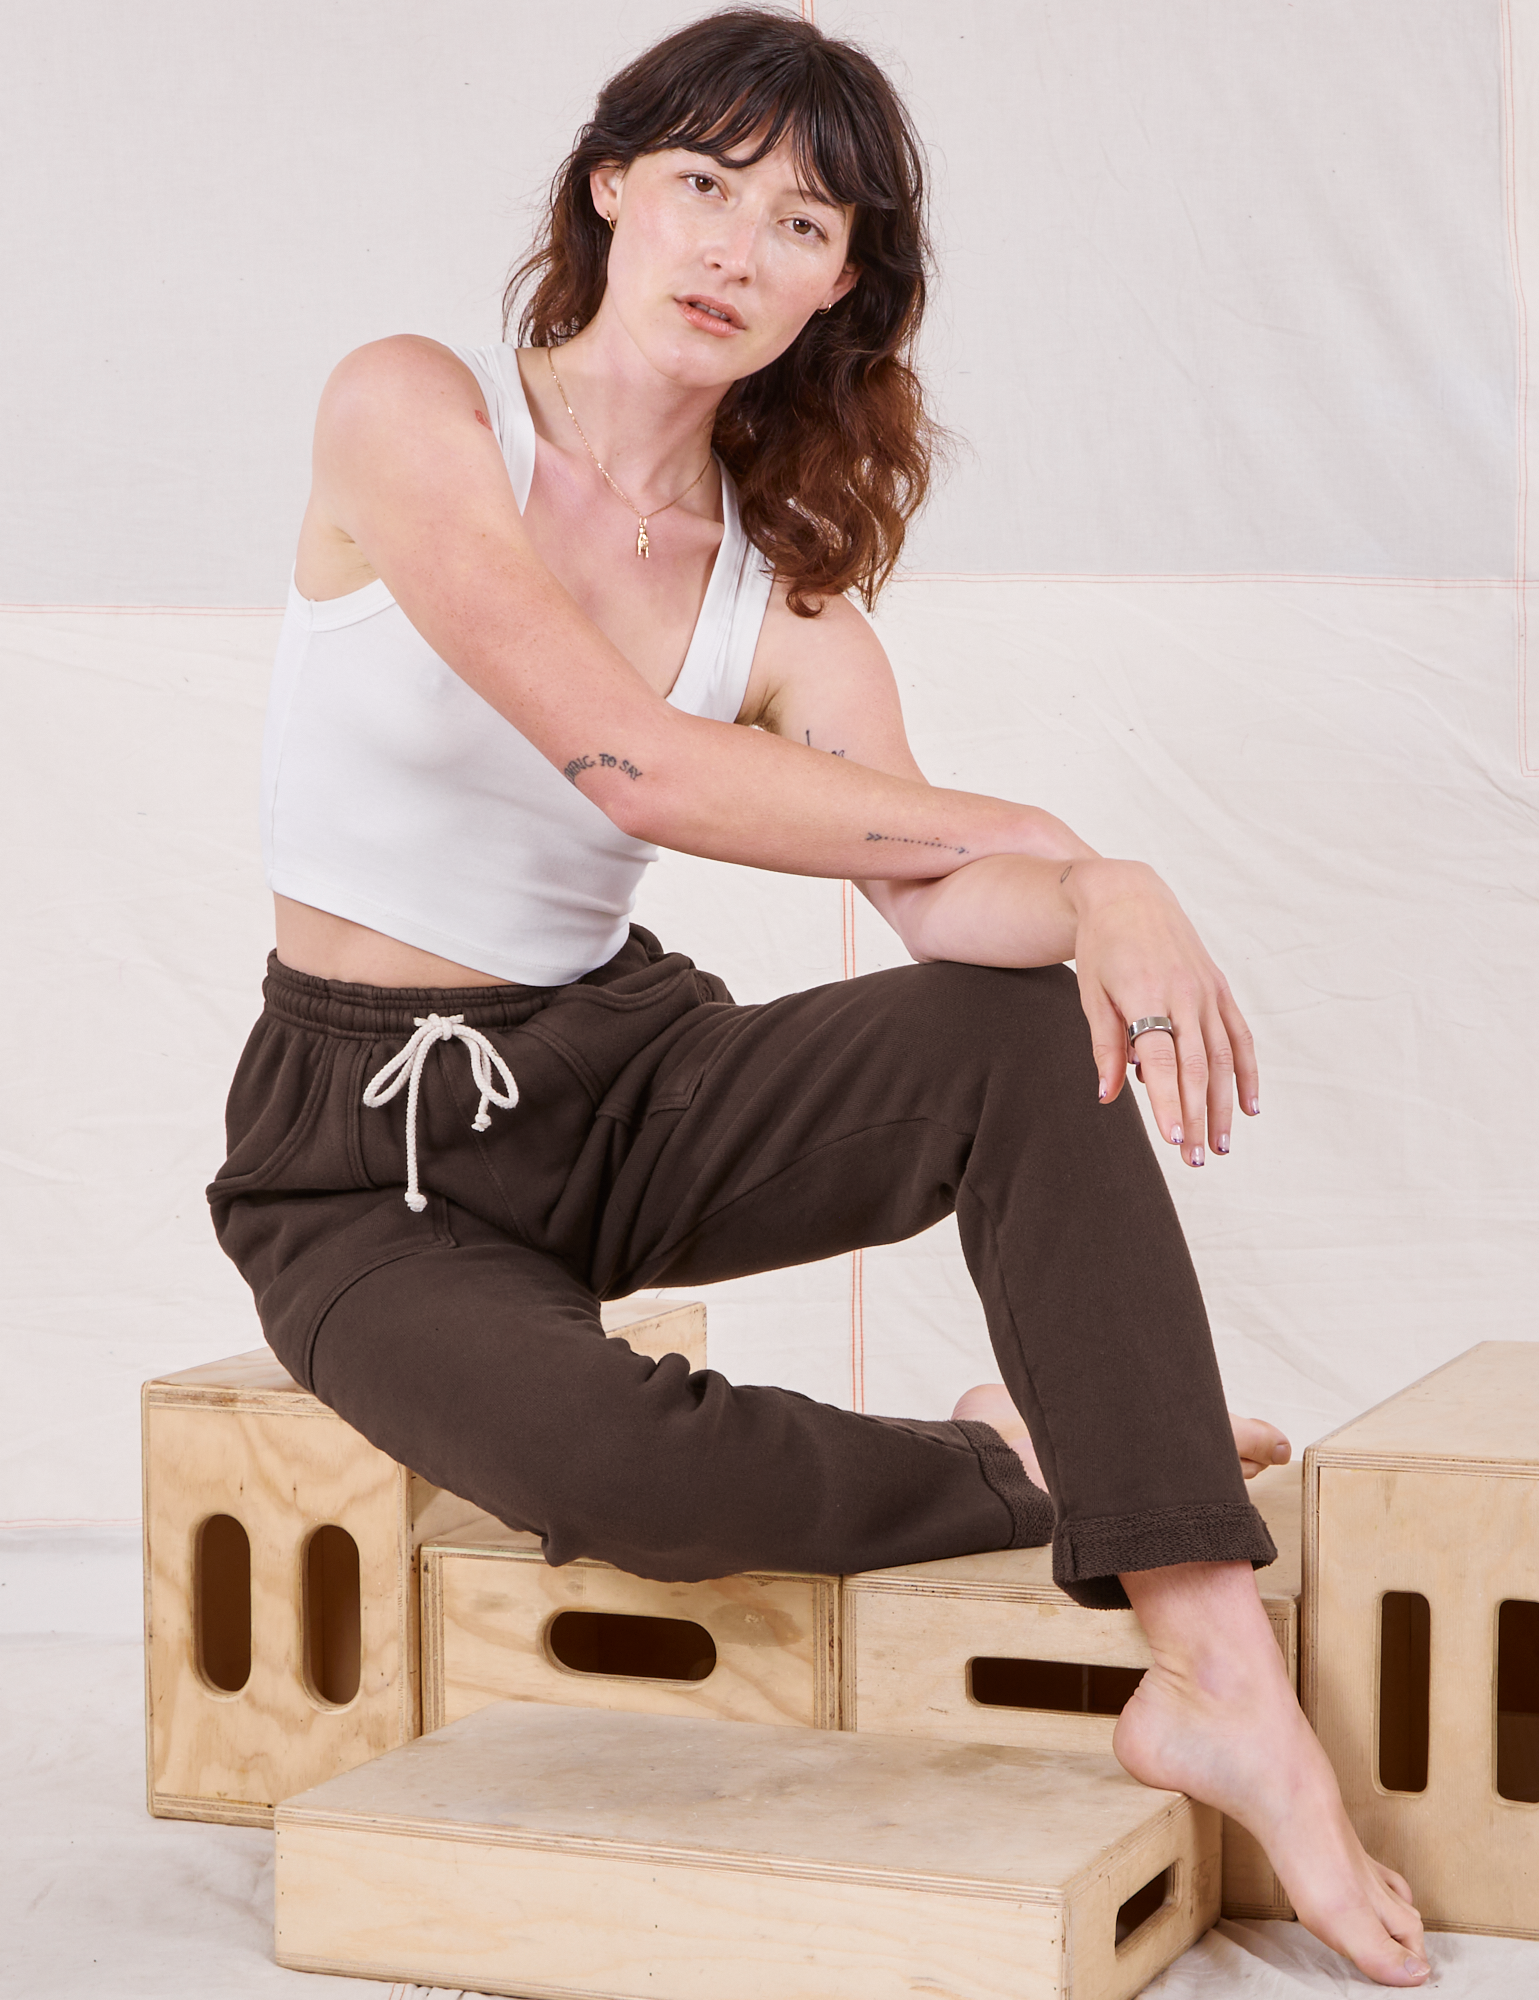 Alex is wearing Rolled Cuff Sweat Pants in Espresso Brown and vintage off-white Cropped Tank